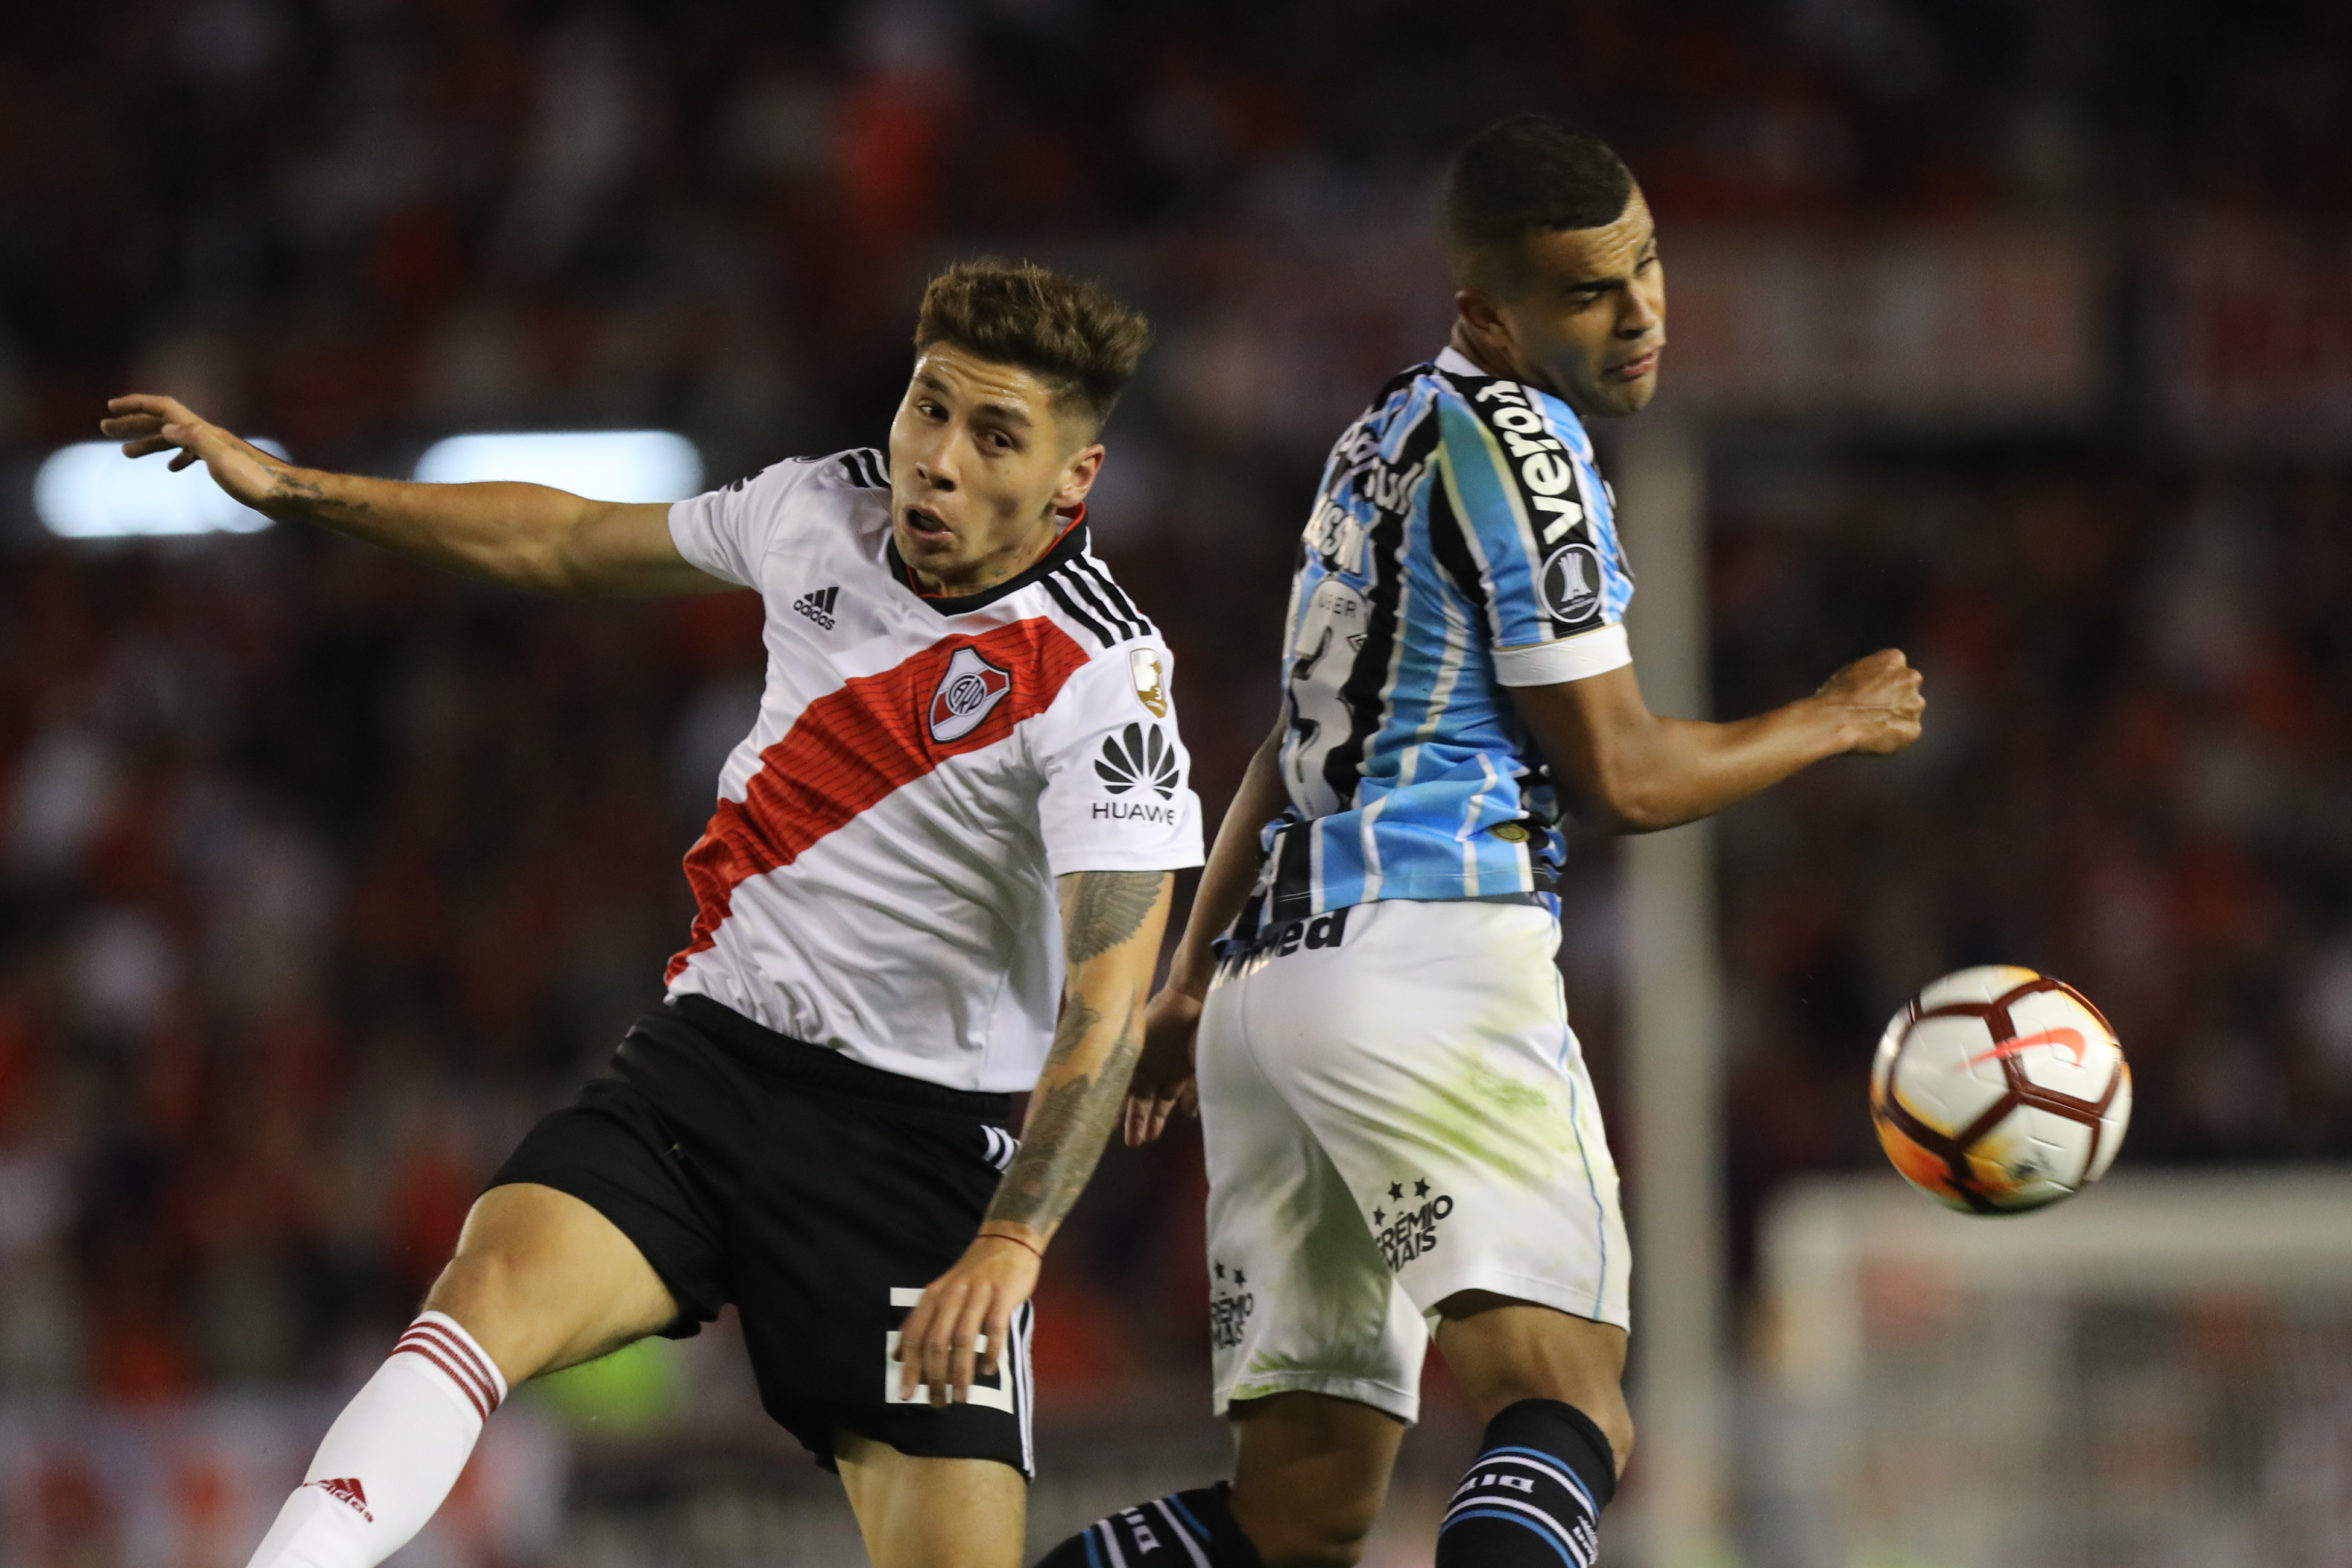 epa07115272 Ignacio Fernandez (L) of River Plate vies for the ball with Cortez (R) of Gremio during the Copa Libertadores semifinal first leg match between River Plate of Argentina and Gremio of Brazil, at the Monumental Stadium, in Buenos Aires, Argentina, 23 October 2018.  EPA/JUAN IGNACIO RONCORONI